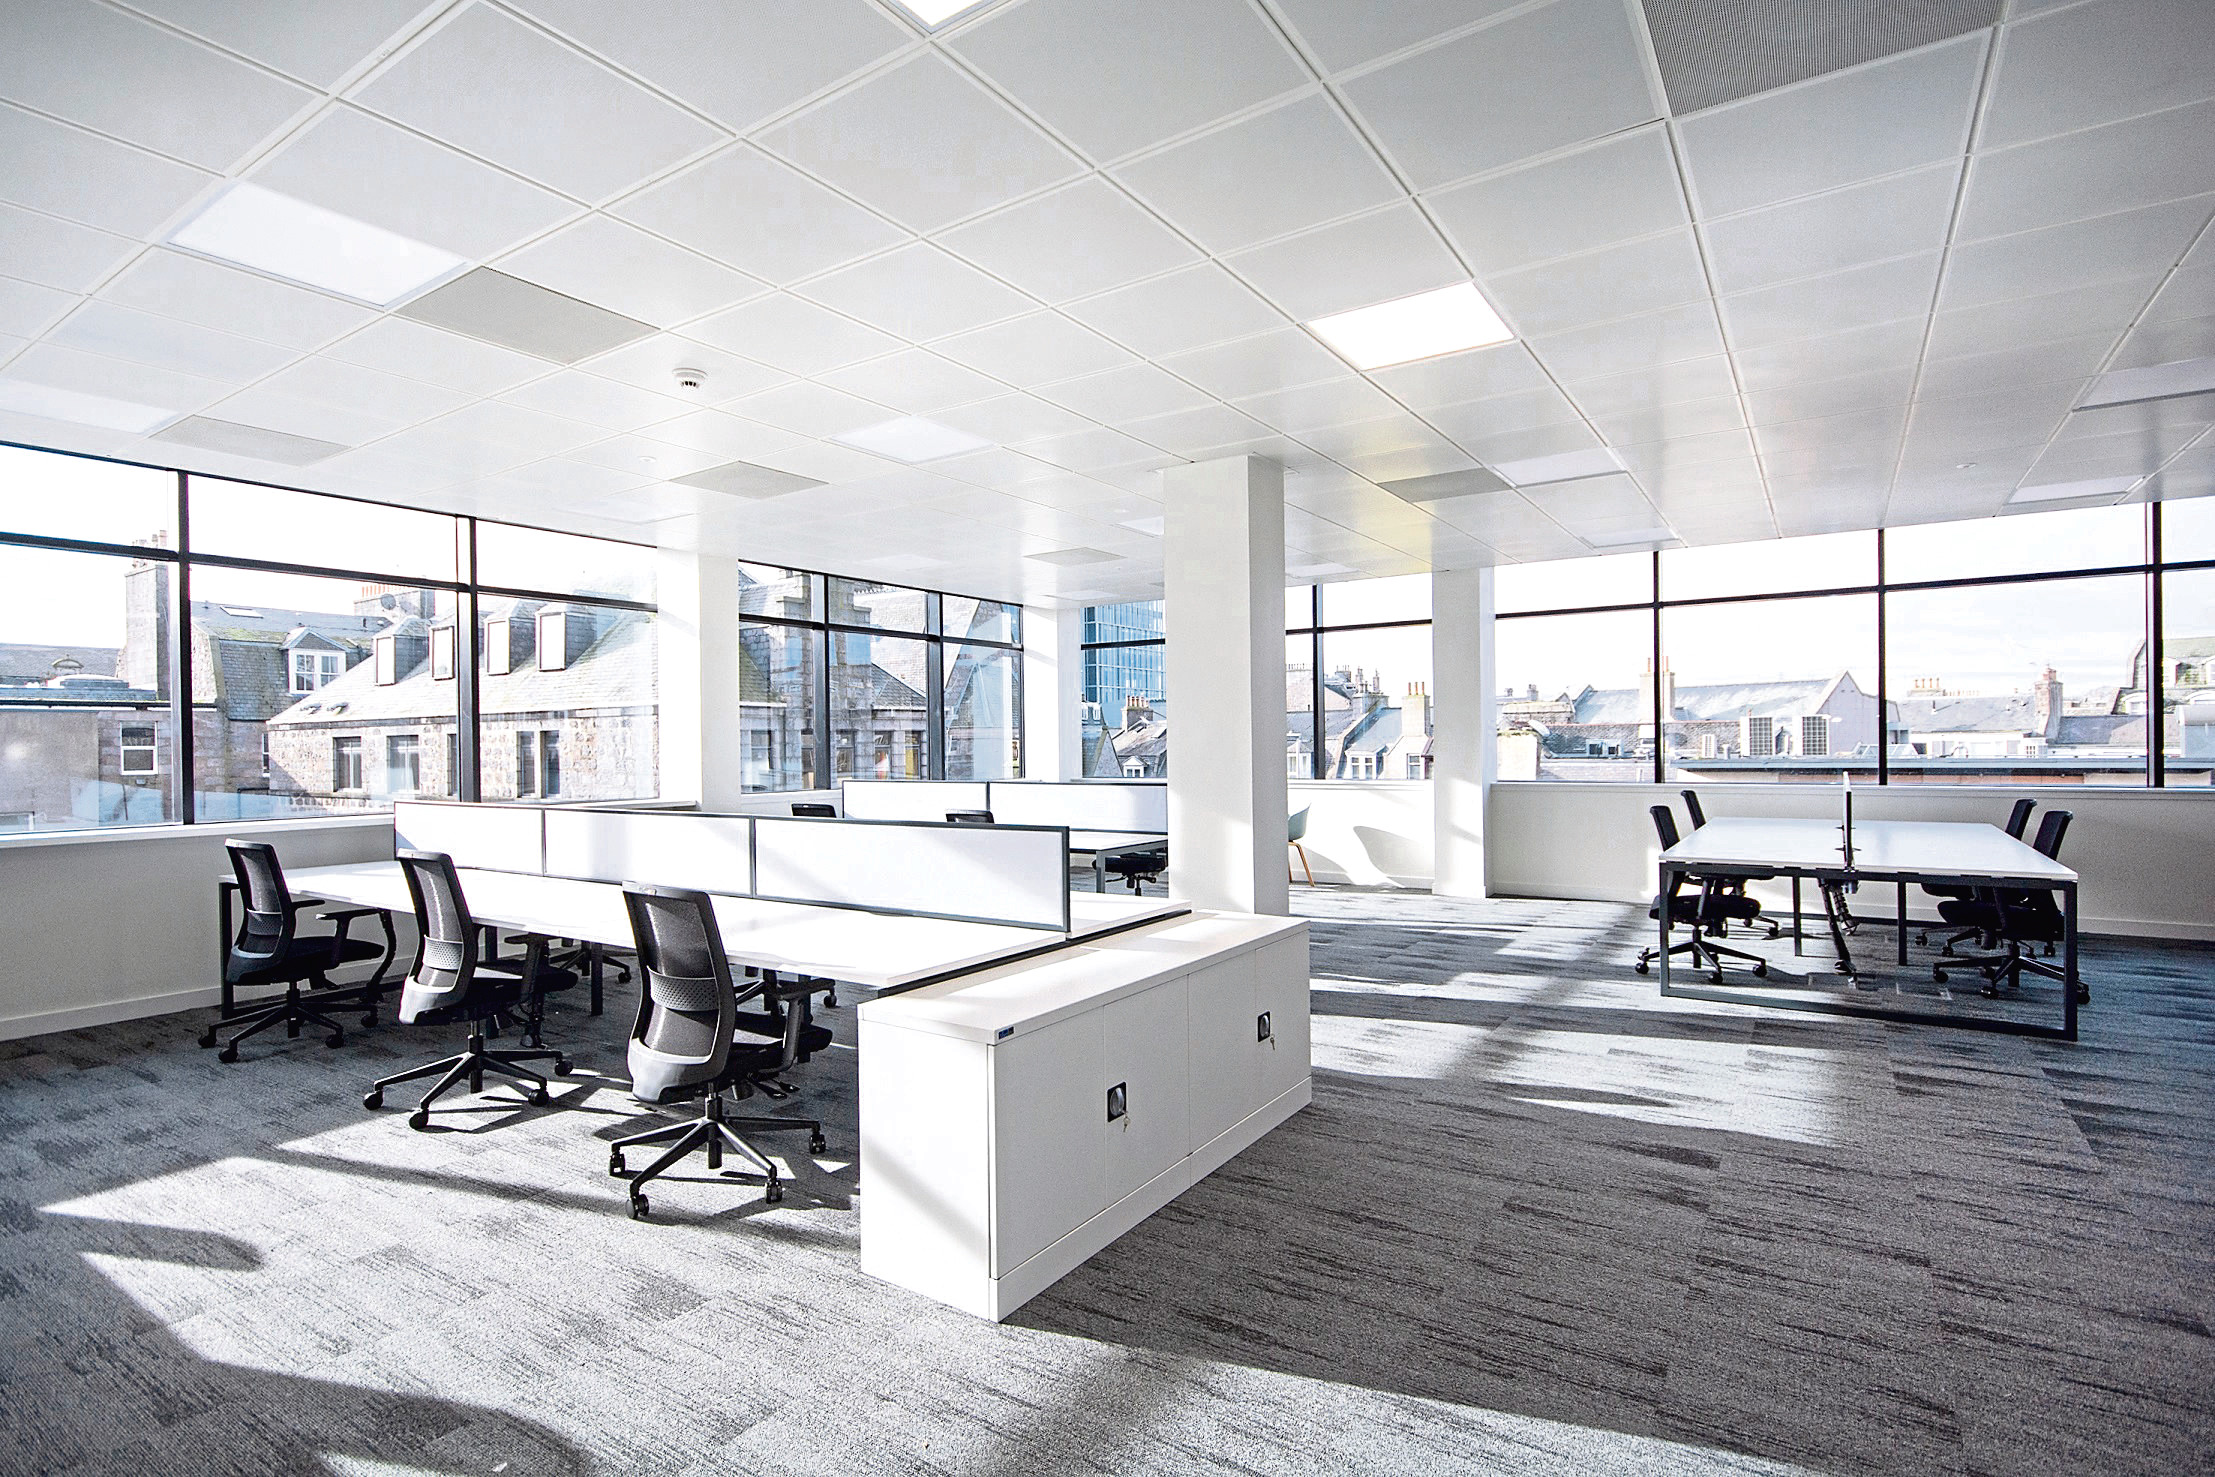 Paragon is advising LGIM Real Assets on its new Capsule offices (pictured) at Aberdeen's Union Plaza offices